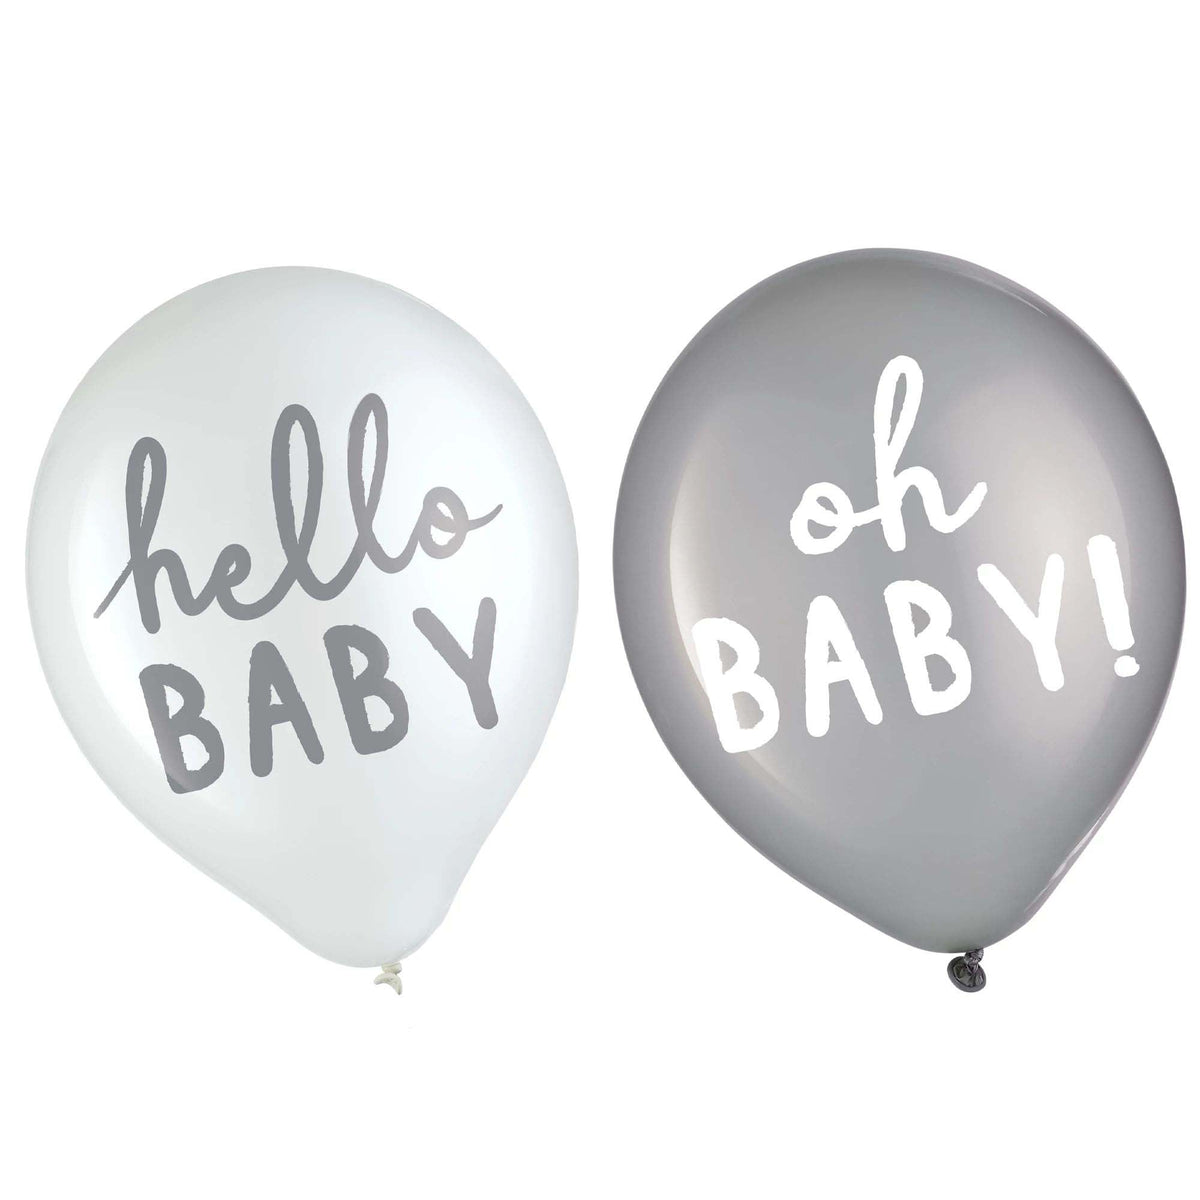 AMSCAN CA Baby Shower Soft Jungle Printed Latex Balloons, White and Grey, 12 Inches, 6 Count 192937344705